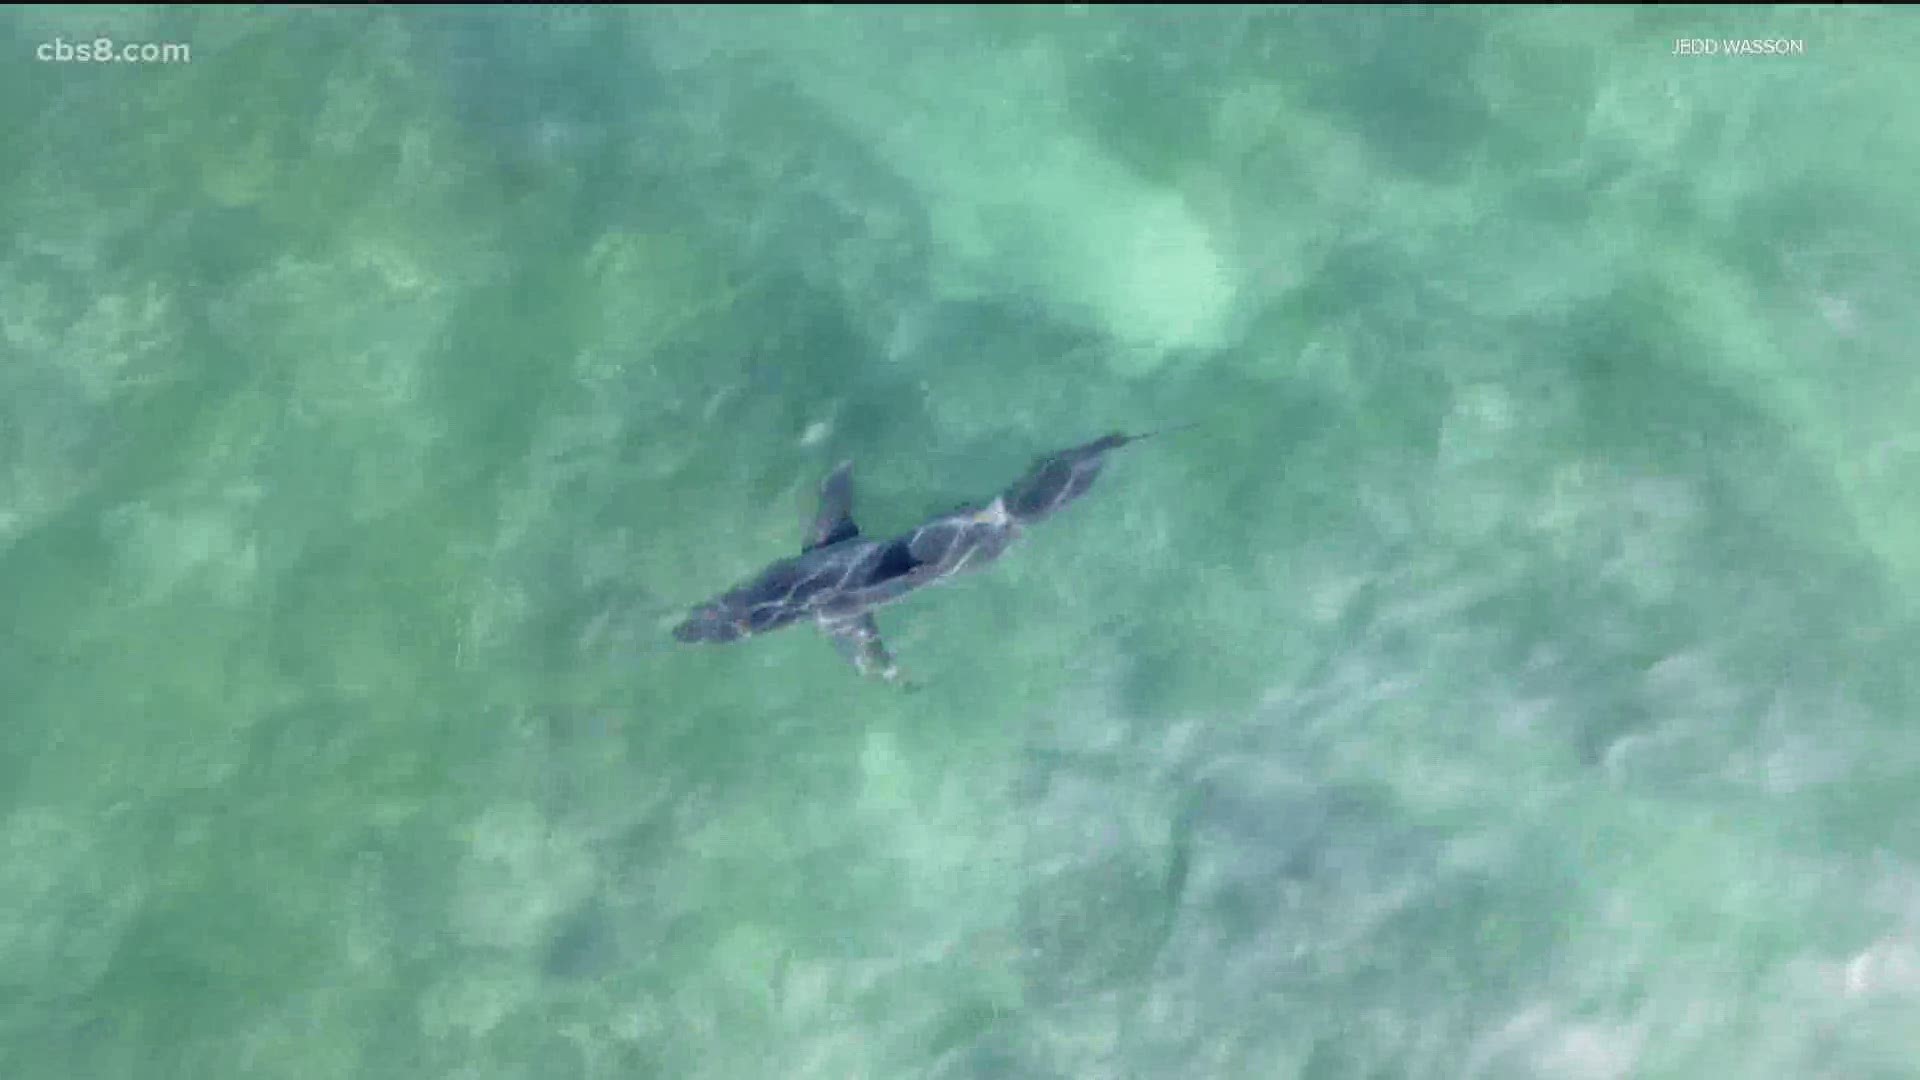 21-year-old Jedd Wasson saw around five juvenile Great White Sharks swimming between 10th and 15th Streets in Del Mar.